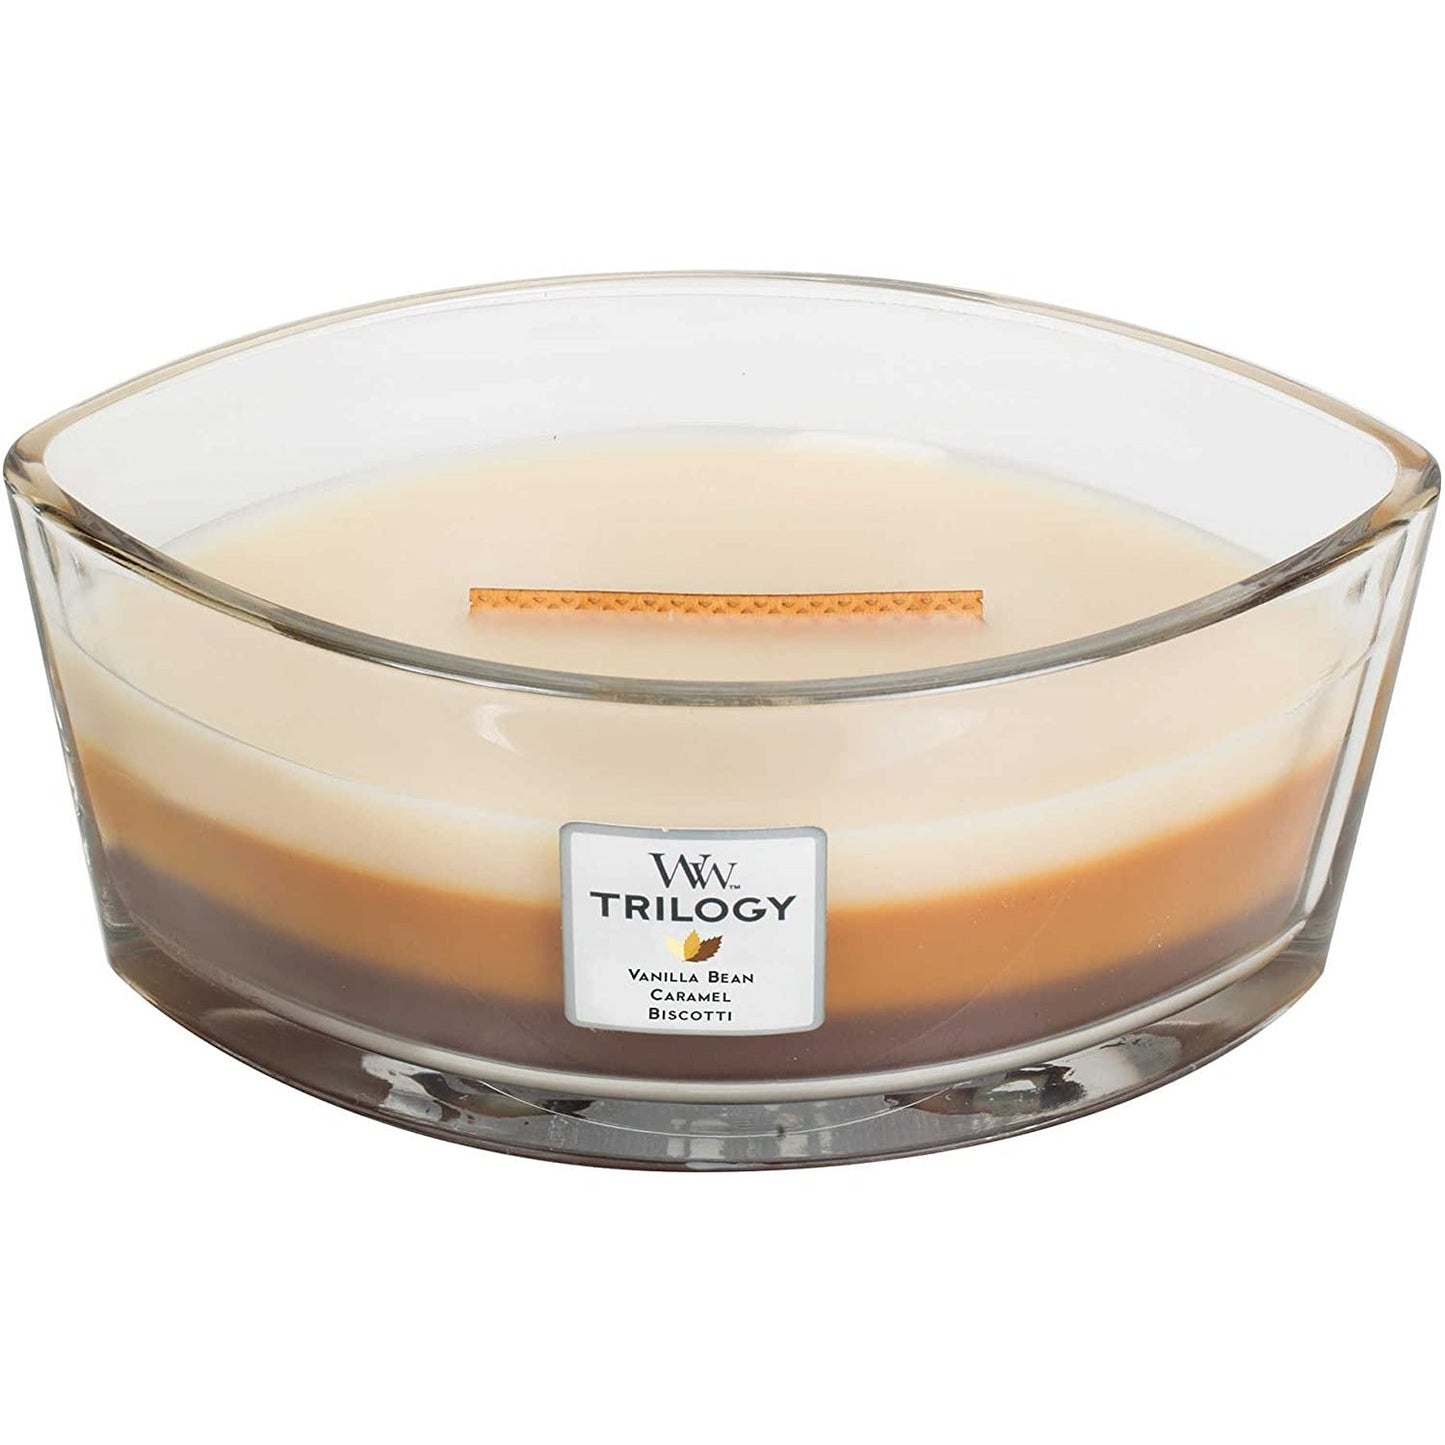 Woodwick Trilogy Candle